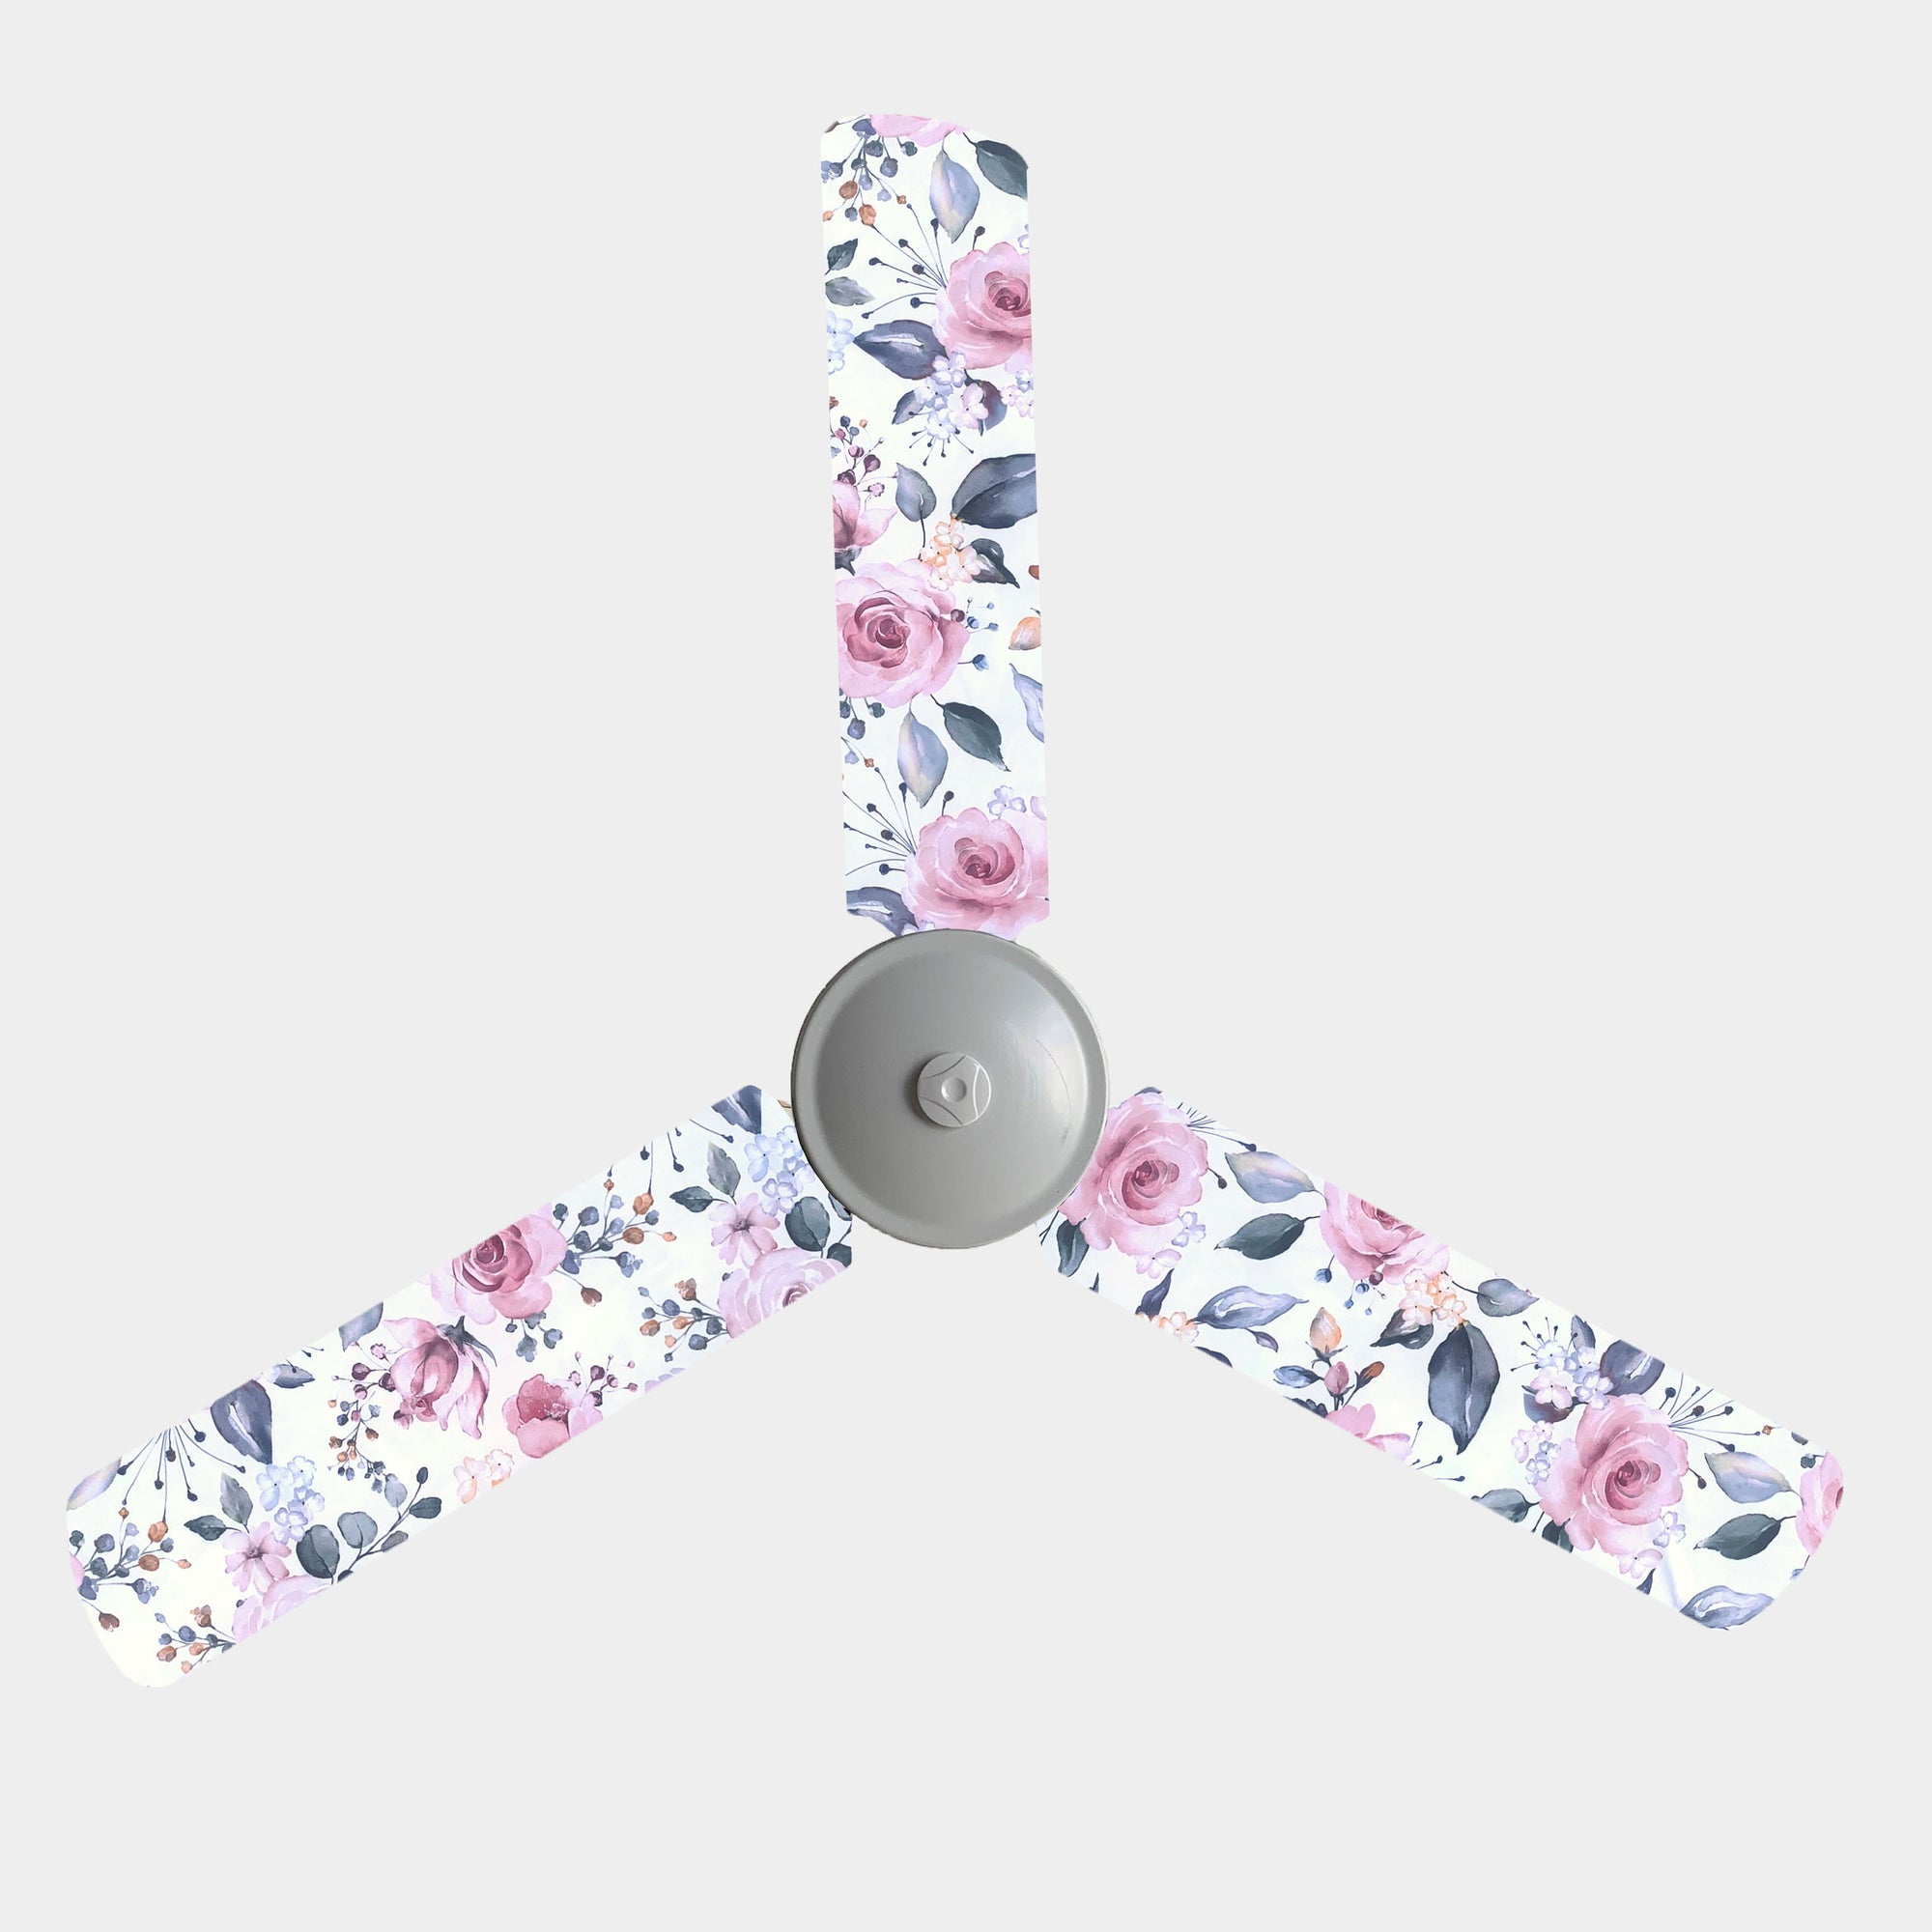 Fan blade socks with large pink roses and green leaves and on a white background